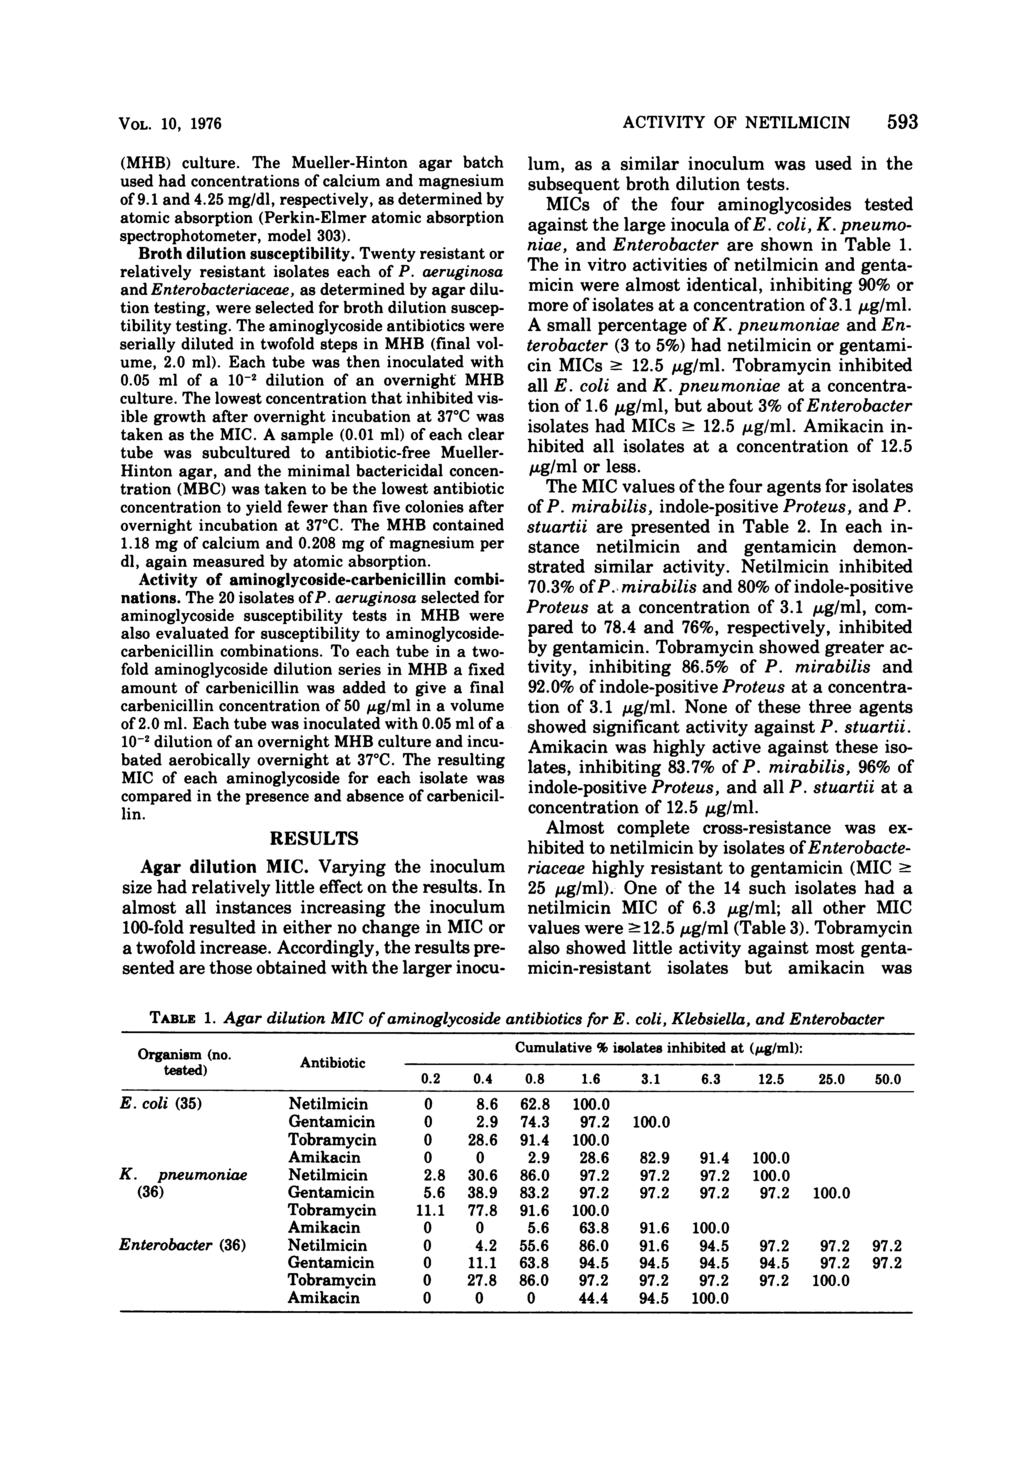 VOL. 1, 1976 (MHB) culture. The Mueller-Hinton agar batch used had concentrations of calcium and magnesium of 9.1 and 4.